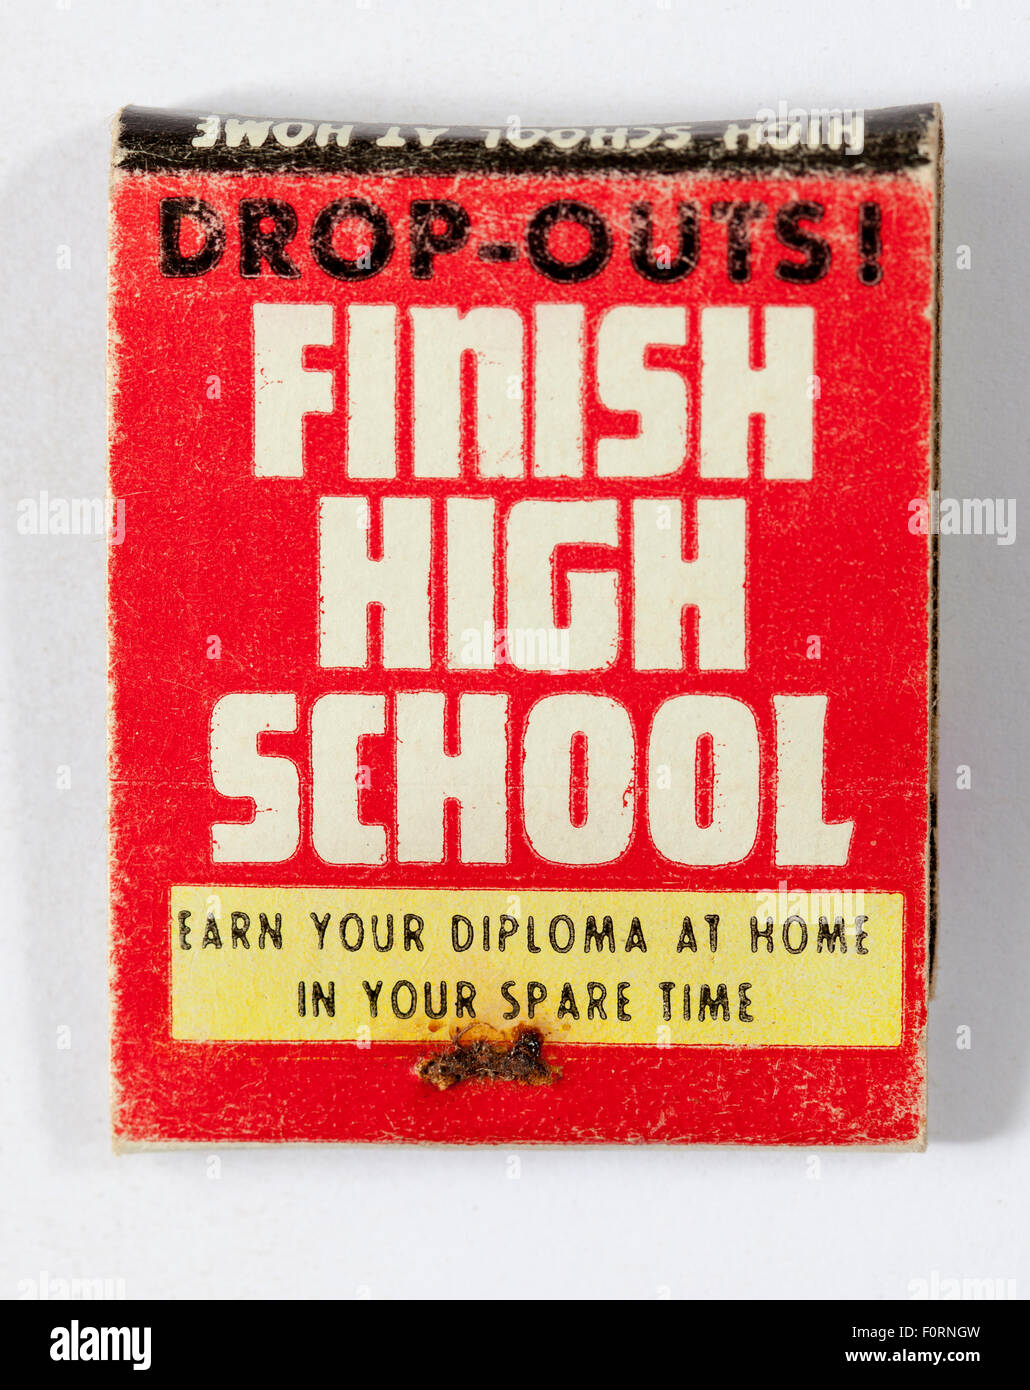 Vintage American Matchbook advertising Further Education Stock Photo